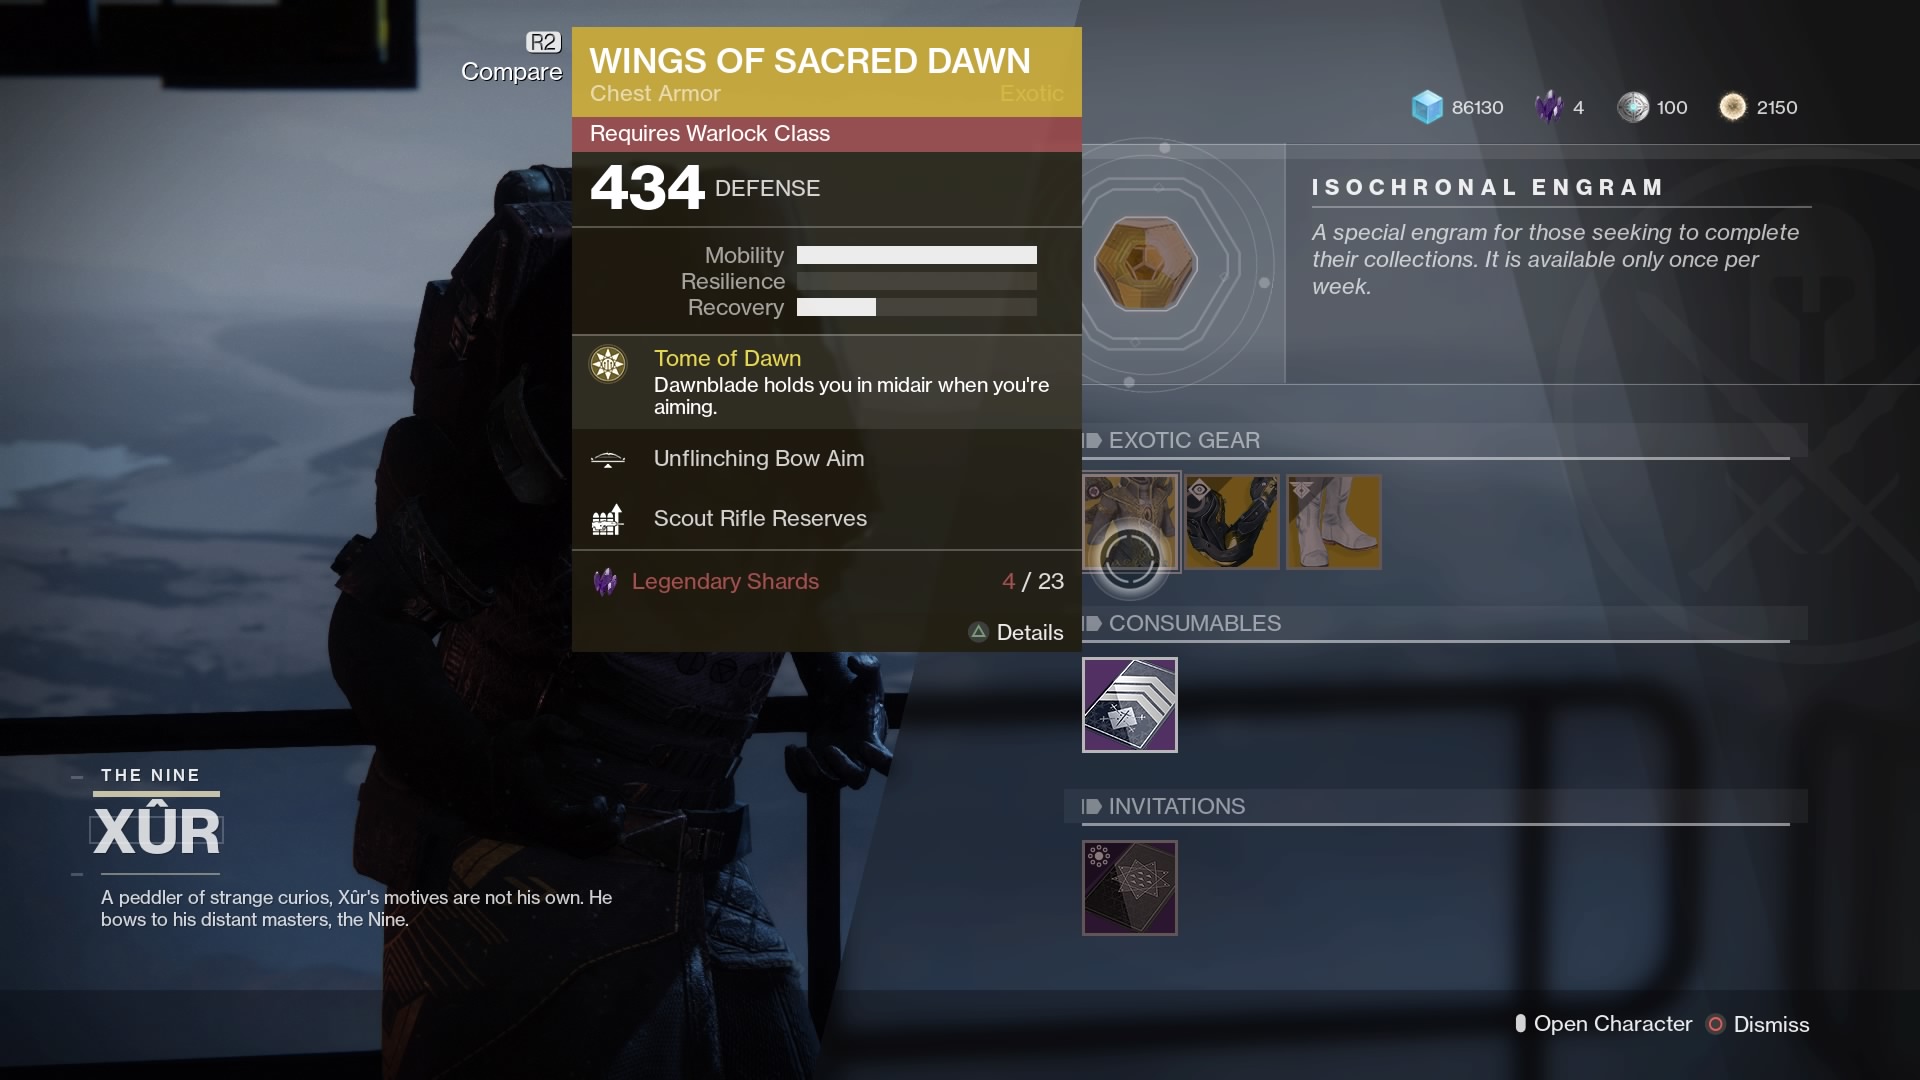 xur inventory today